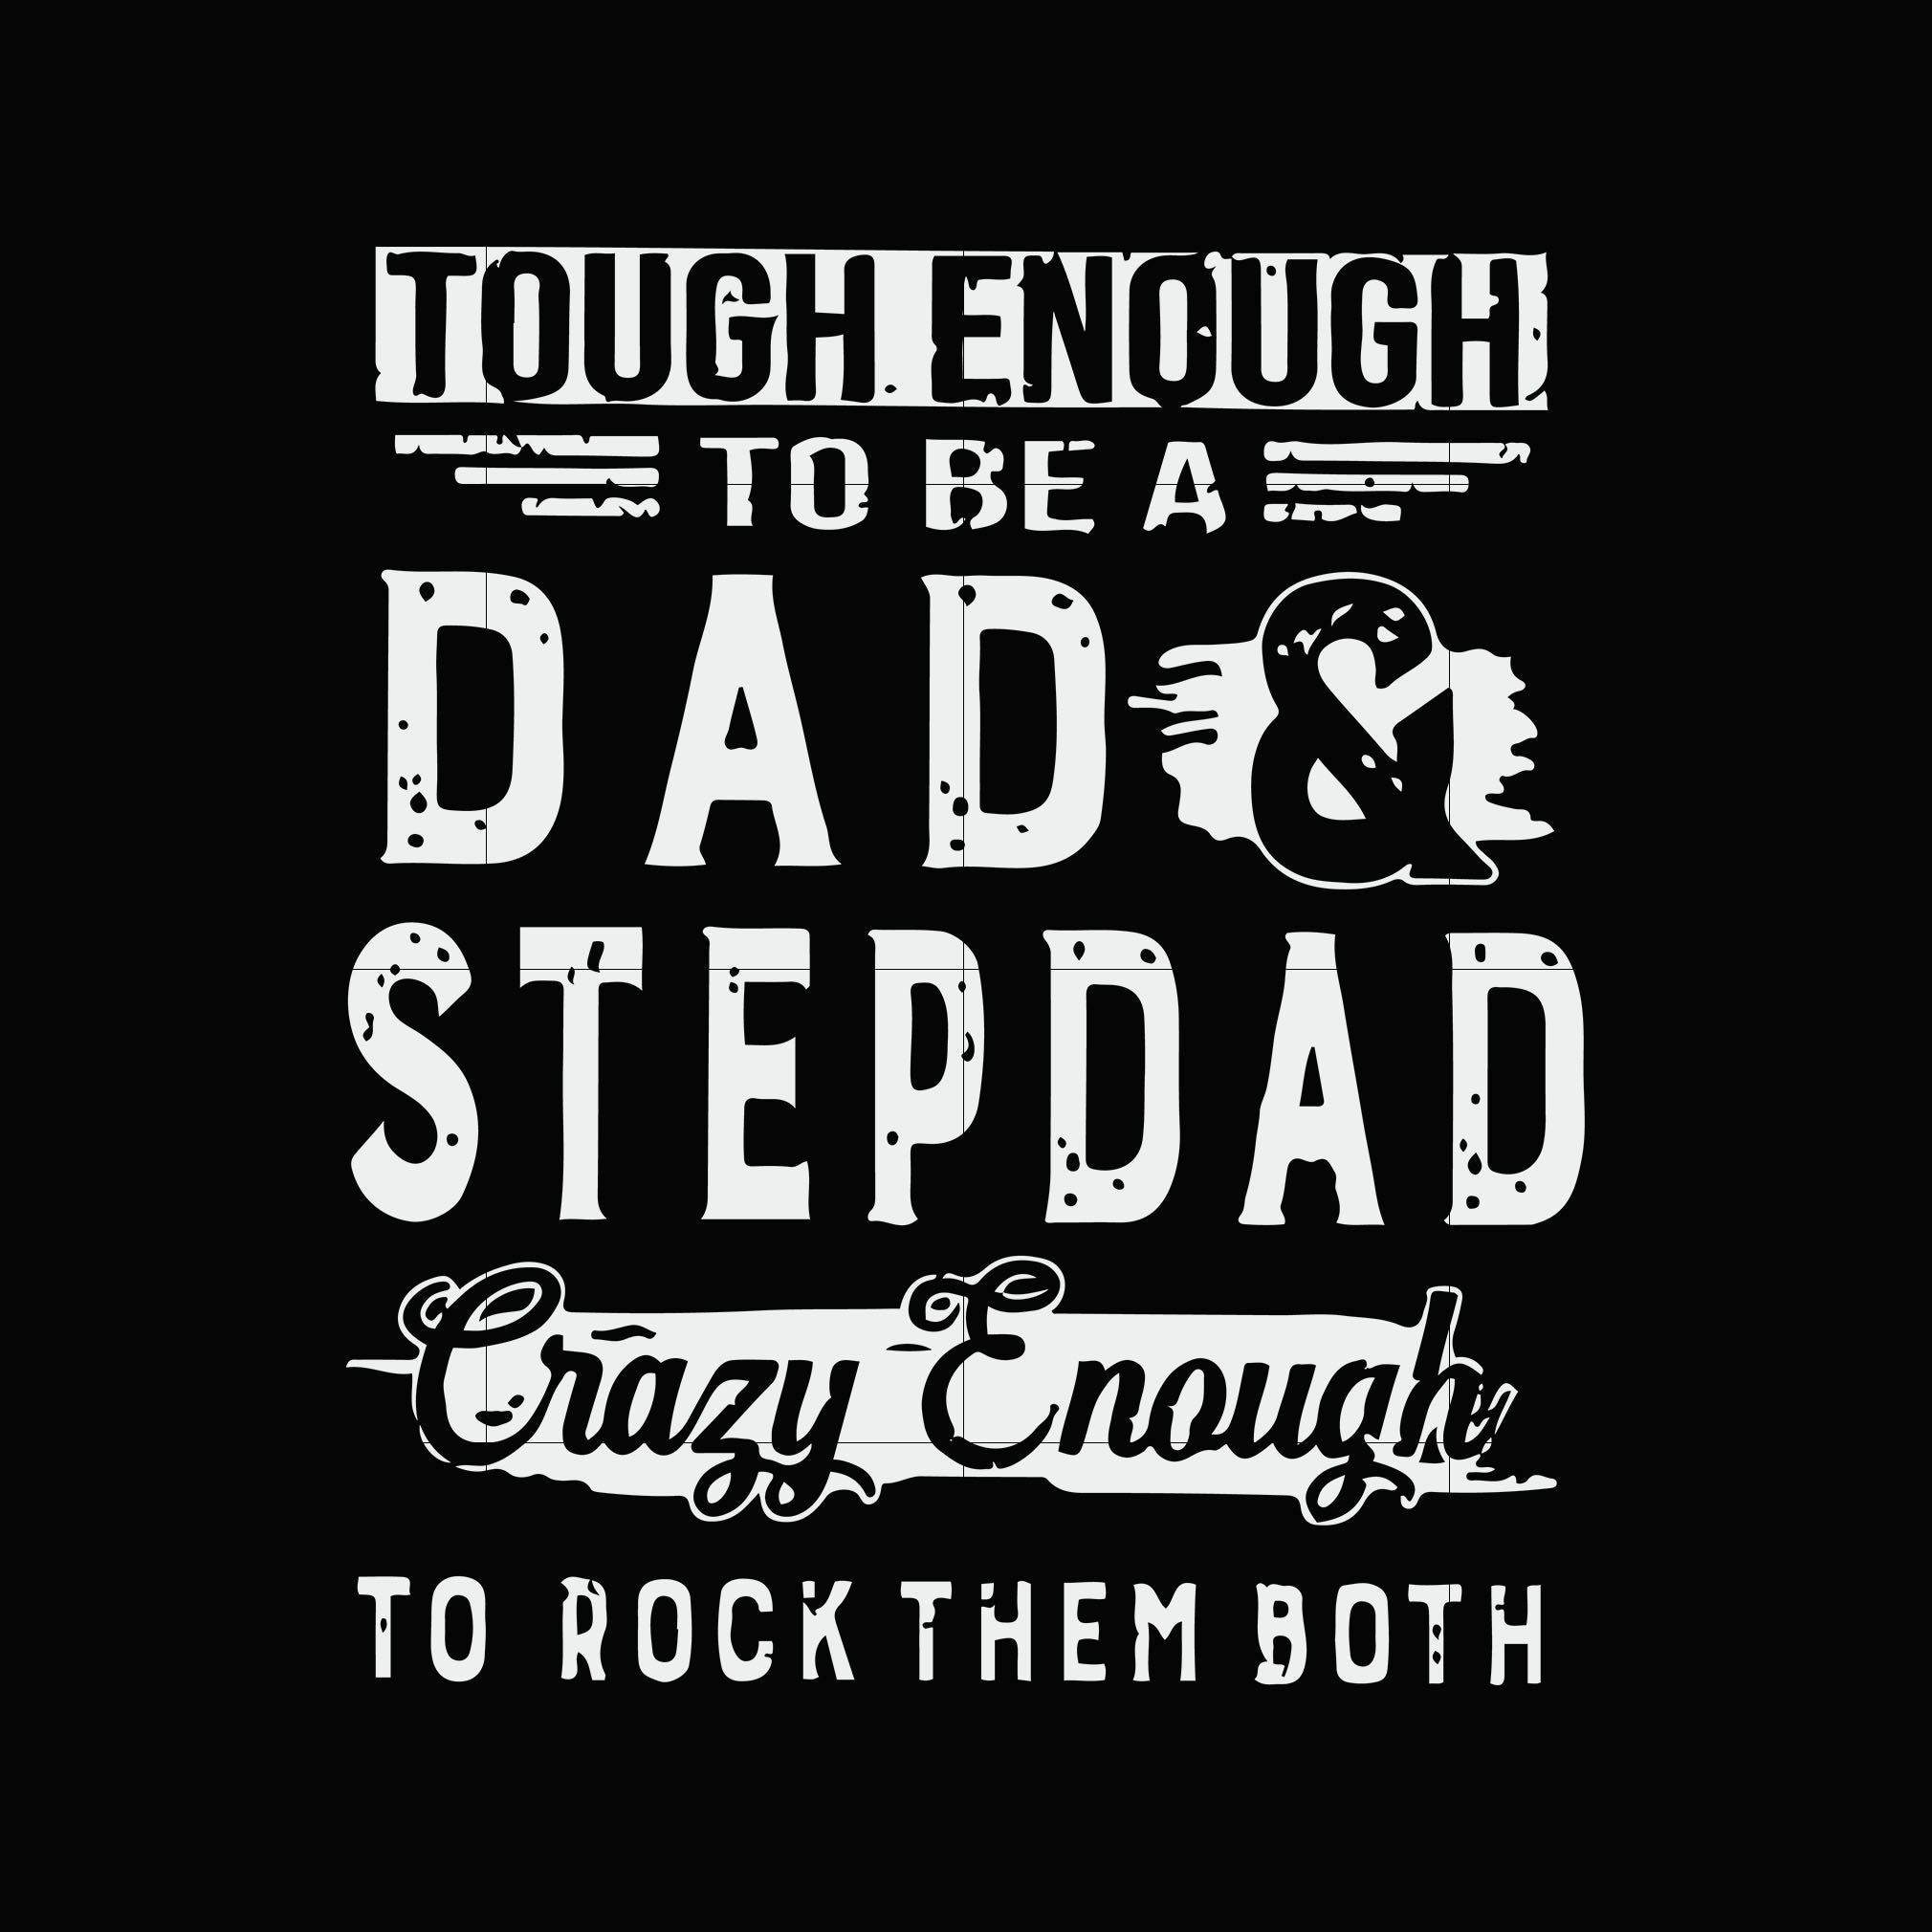 Download Tough Enough To Be A Dad And Stepdad Crazy Enough To Rock Them Both Sv Svgtrending